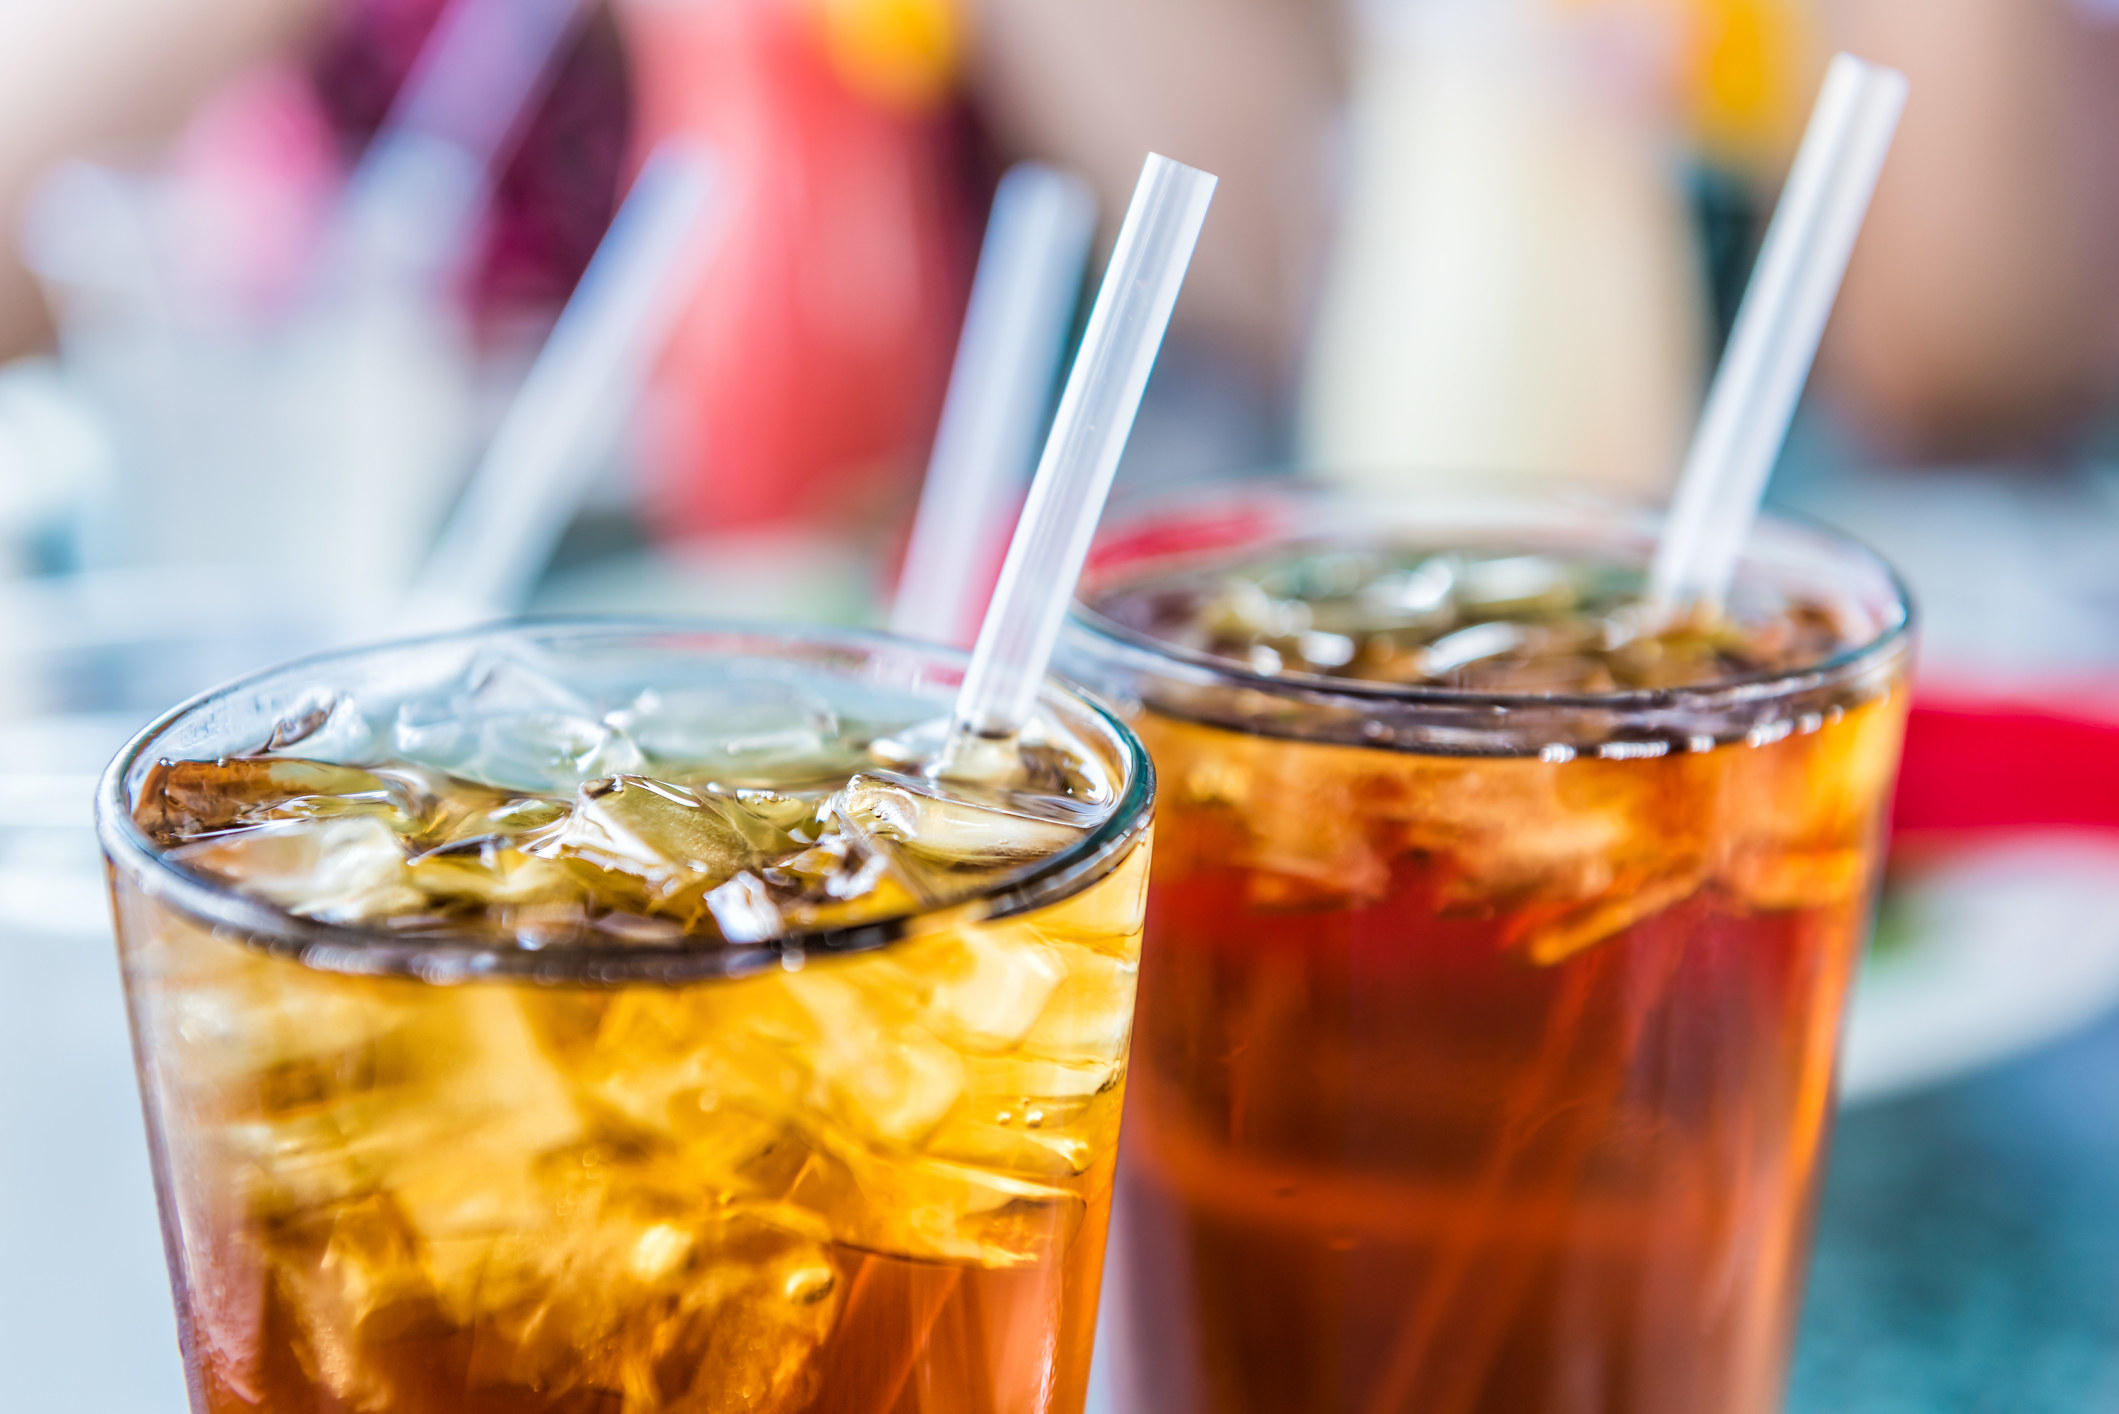 Iced tea in glasses with straws